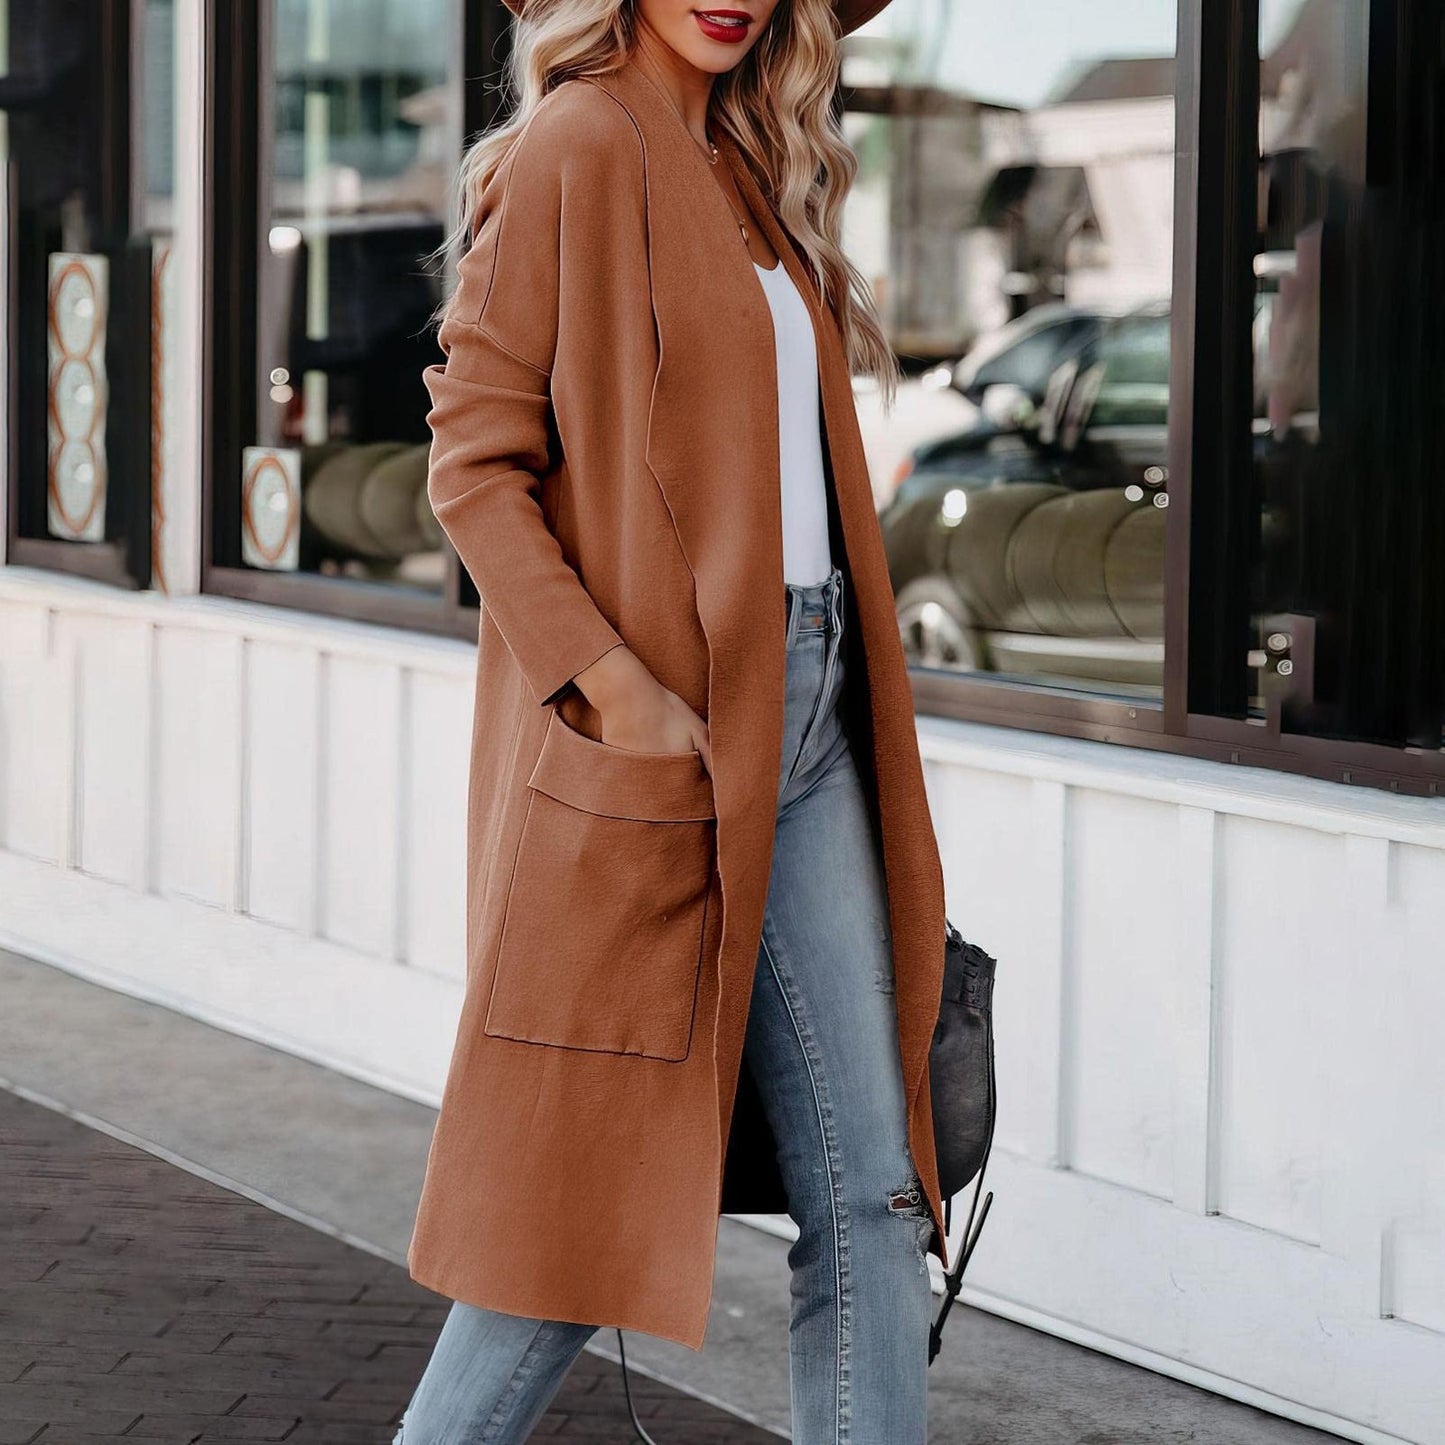 Leisure long solid color warm coat jacket for women